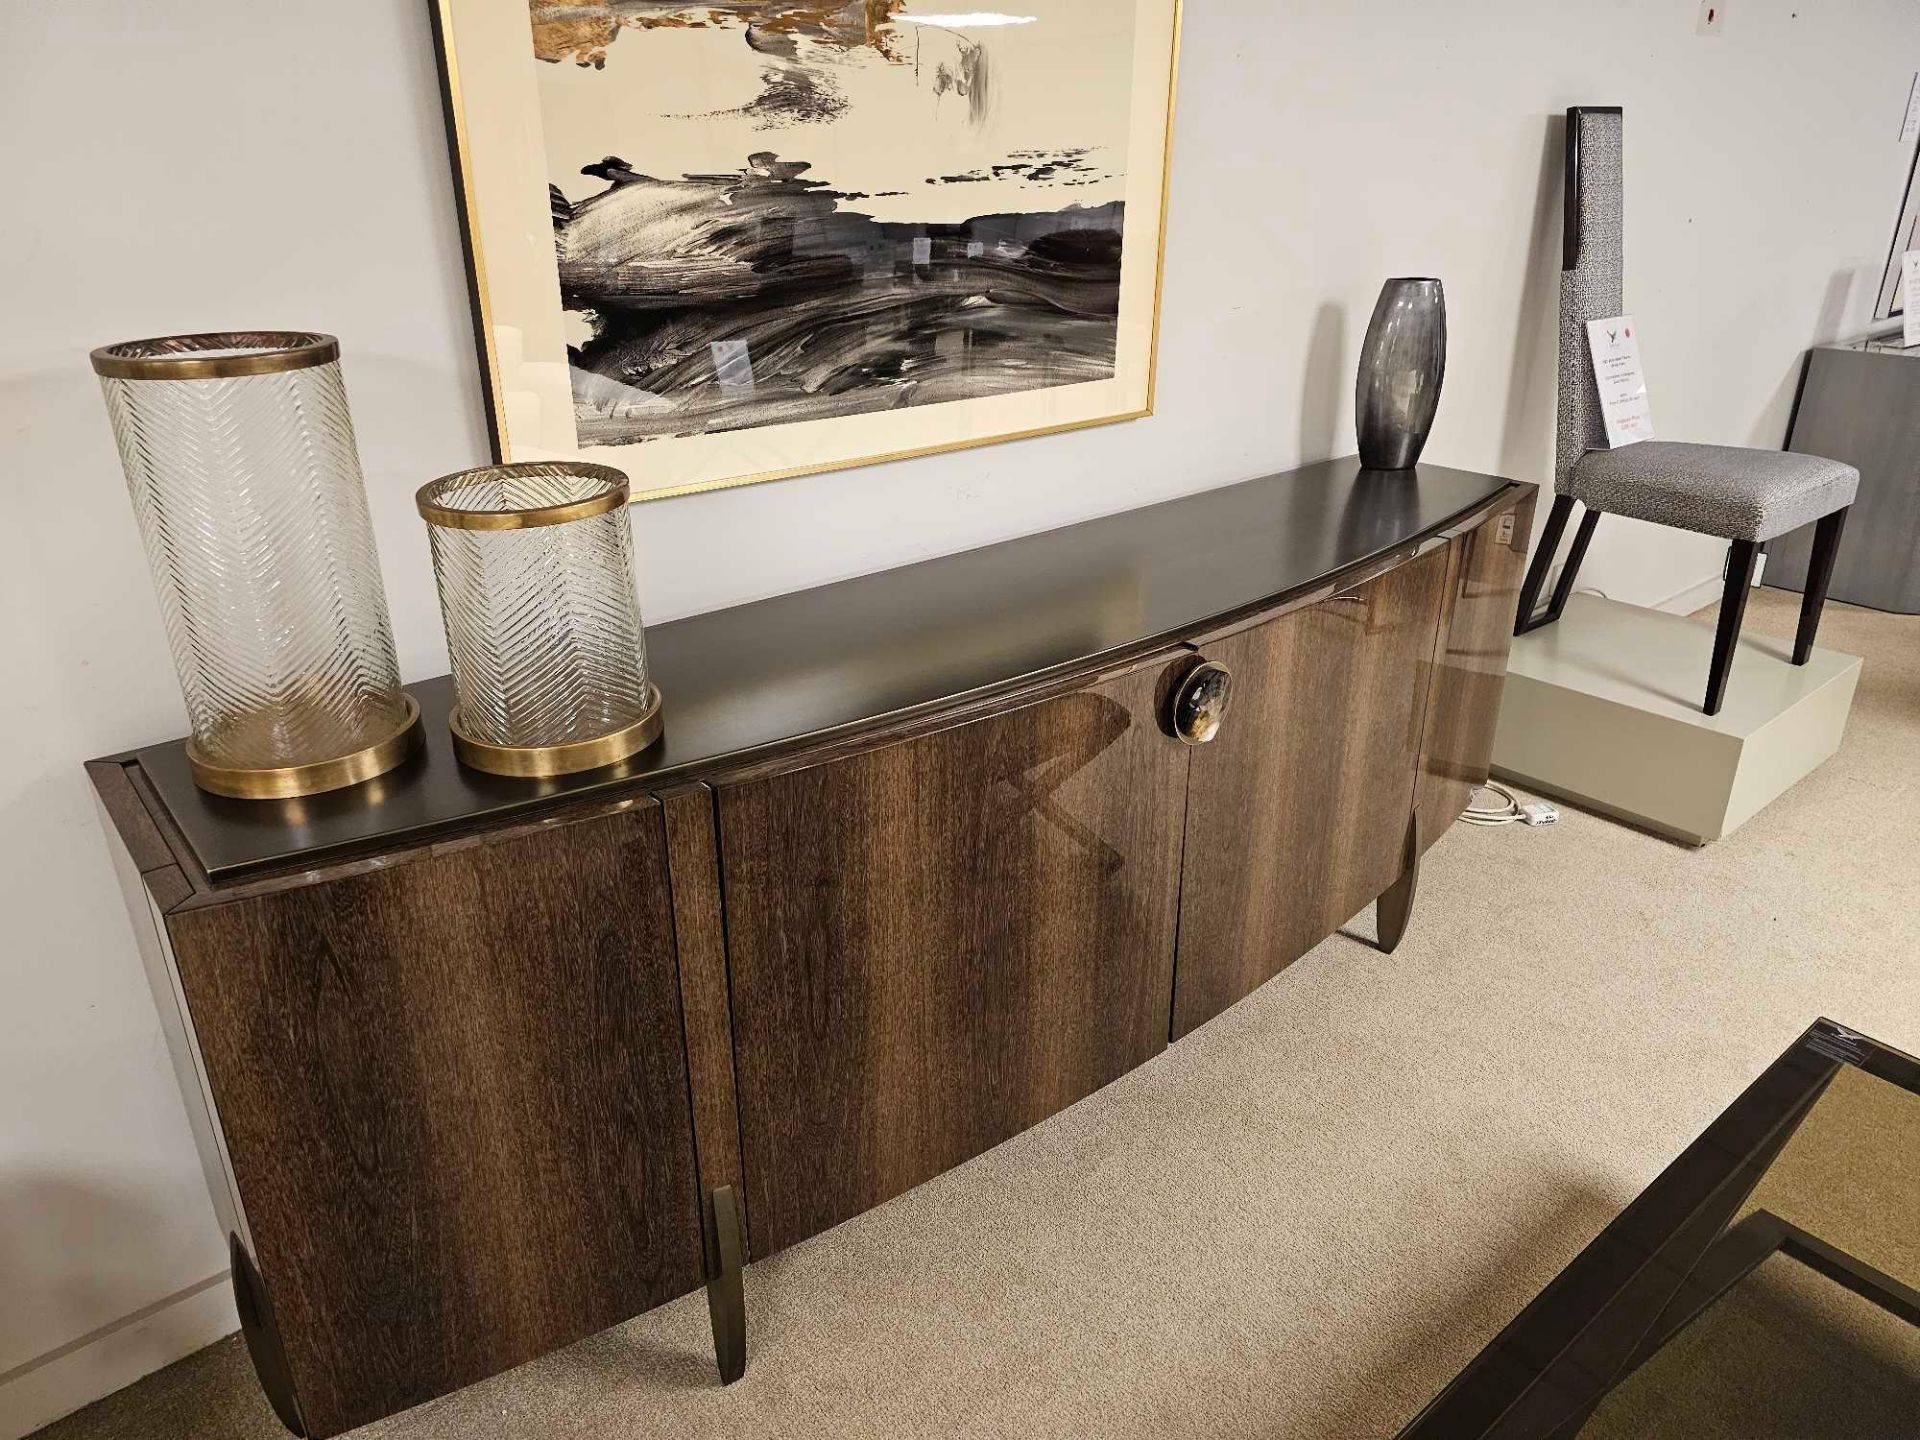 Fashion Affair Large Sideboard by Telemaco for Malerba The Buffet, for the living room, is shaped by - Image 21 of 25